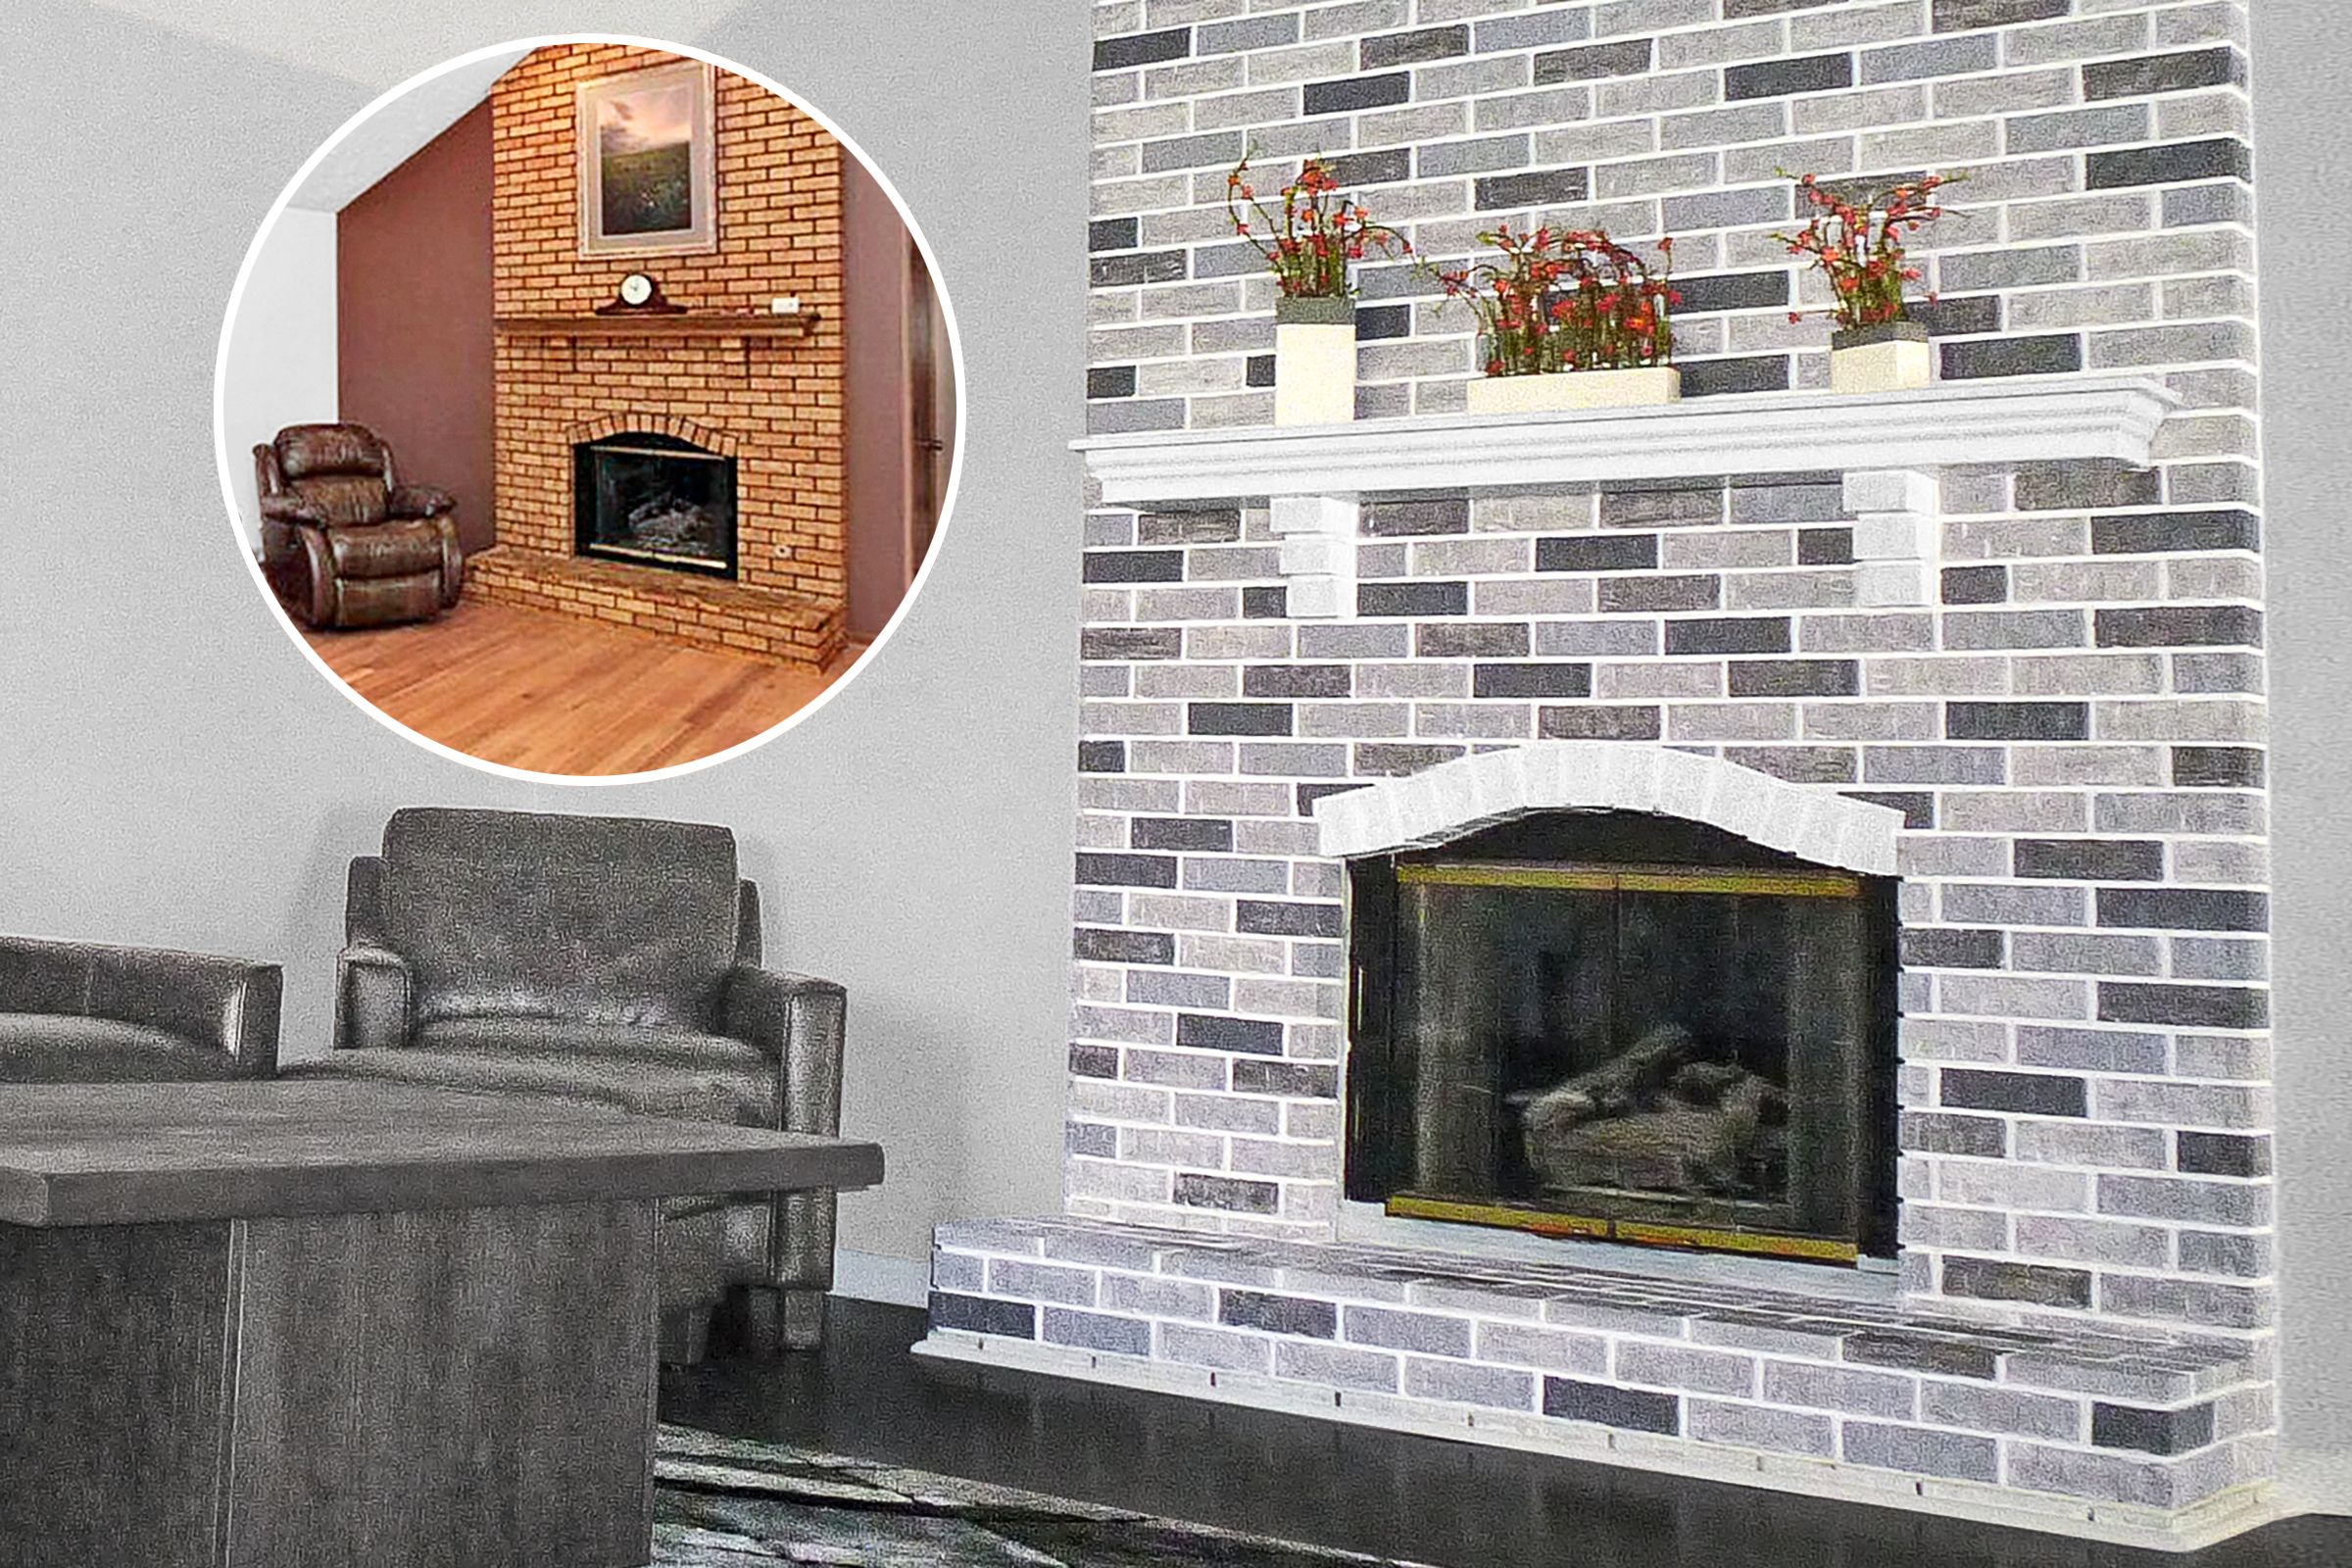 Refreshed fireplace, before and after